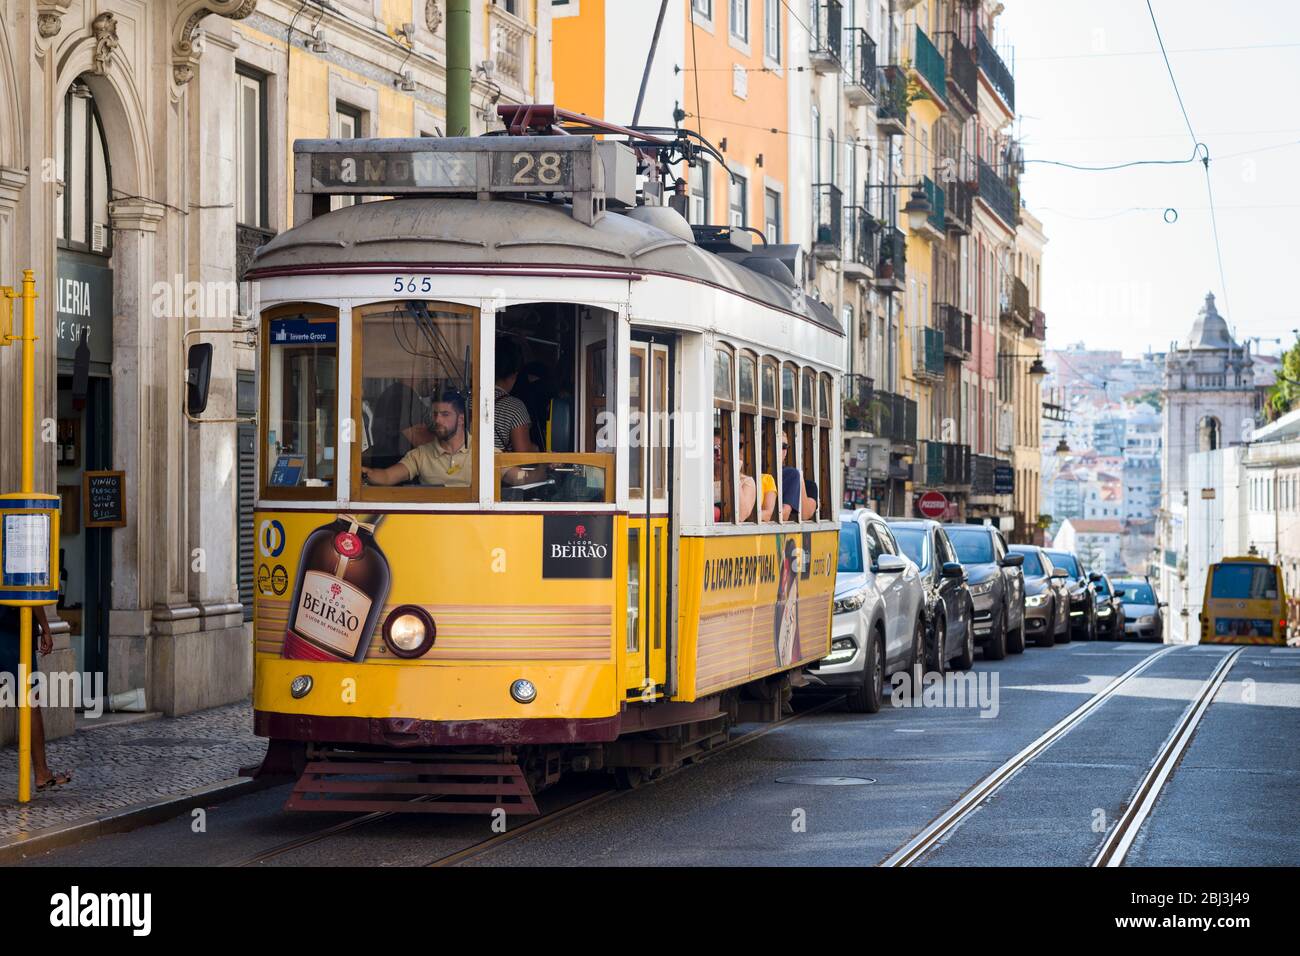 Famous tram no. 28 carrying local people and tourists on tram tracks ii Praca Luis de Camoes n City of Lisbon, Portugal Stock Photo